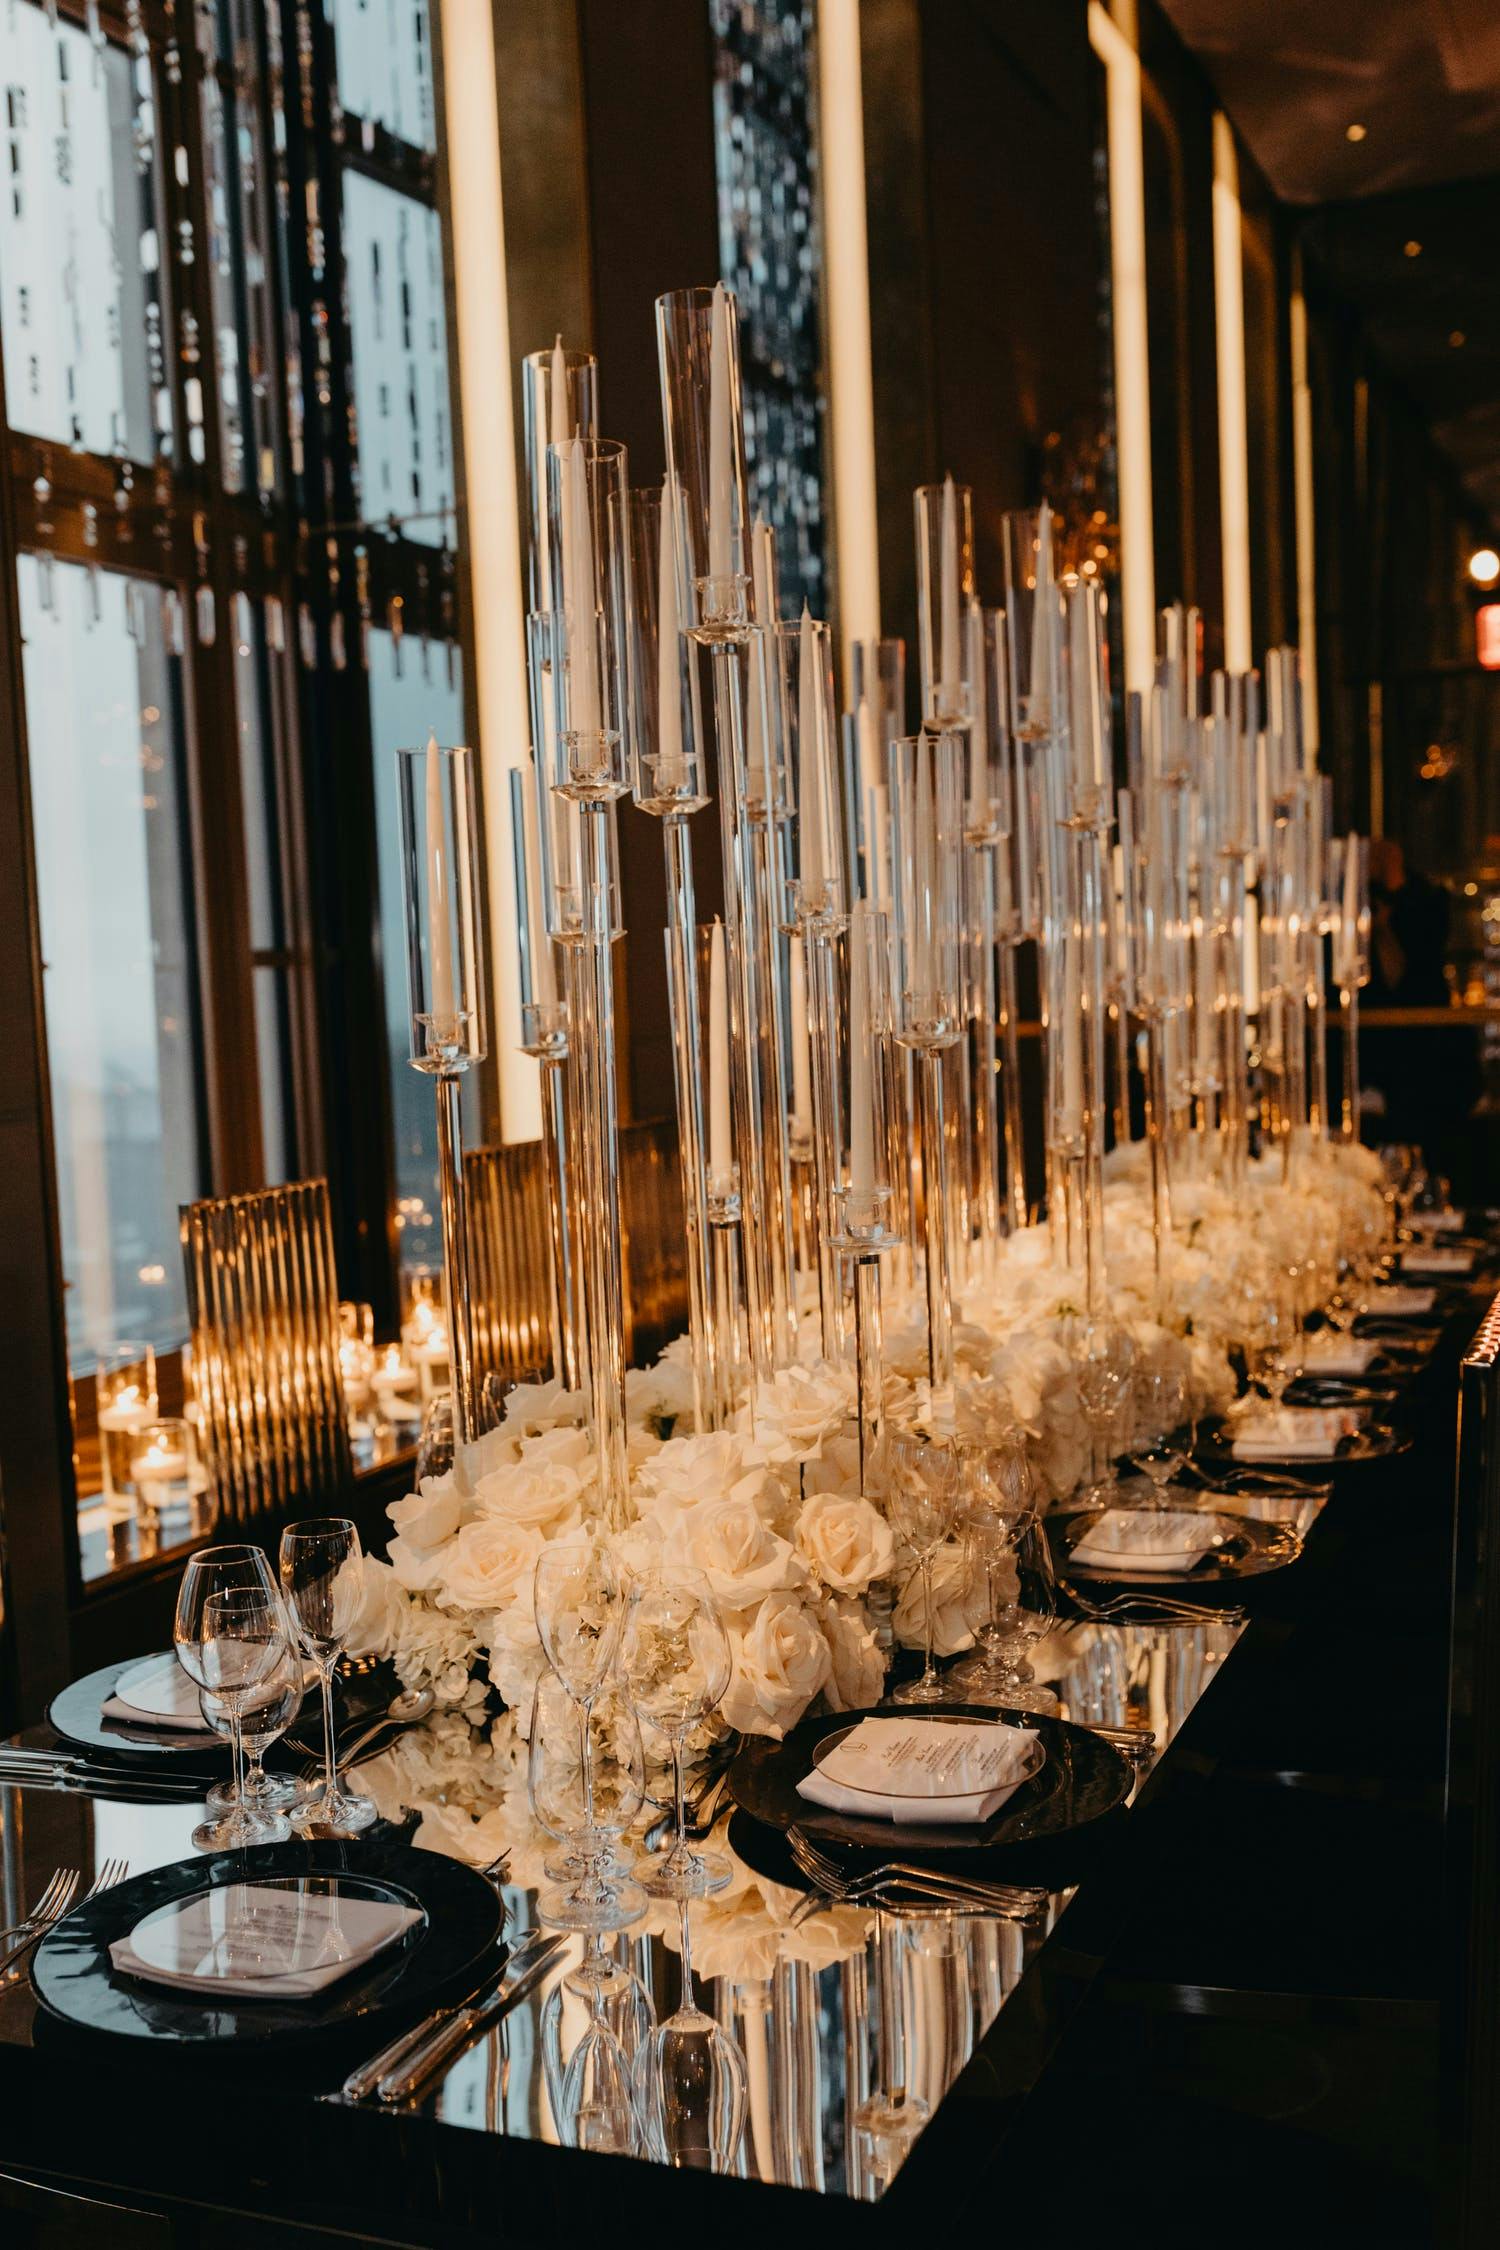 Black and White Wedding Tablescape With Towering Candles, Mirrored Tabletops, White Rose Centerpieces, and Black Dinnerware | PartySlate